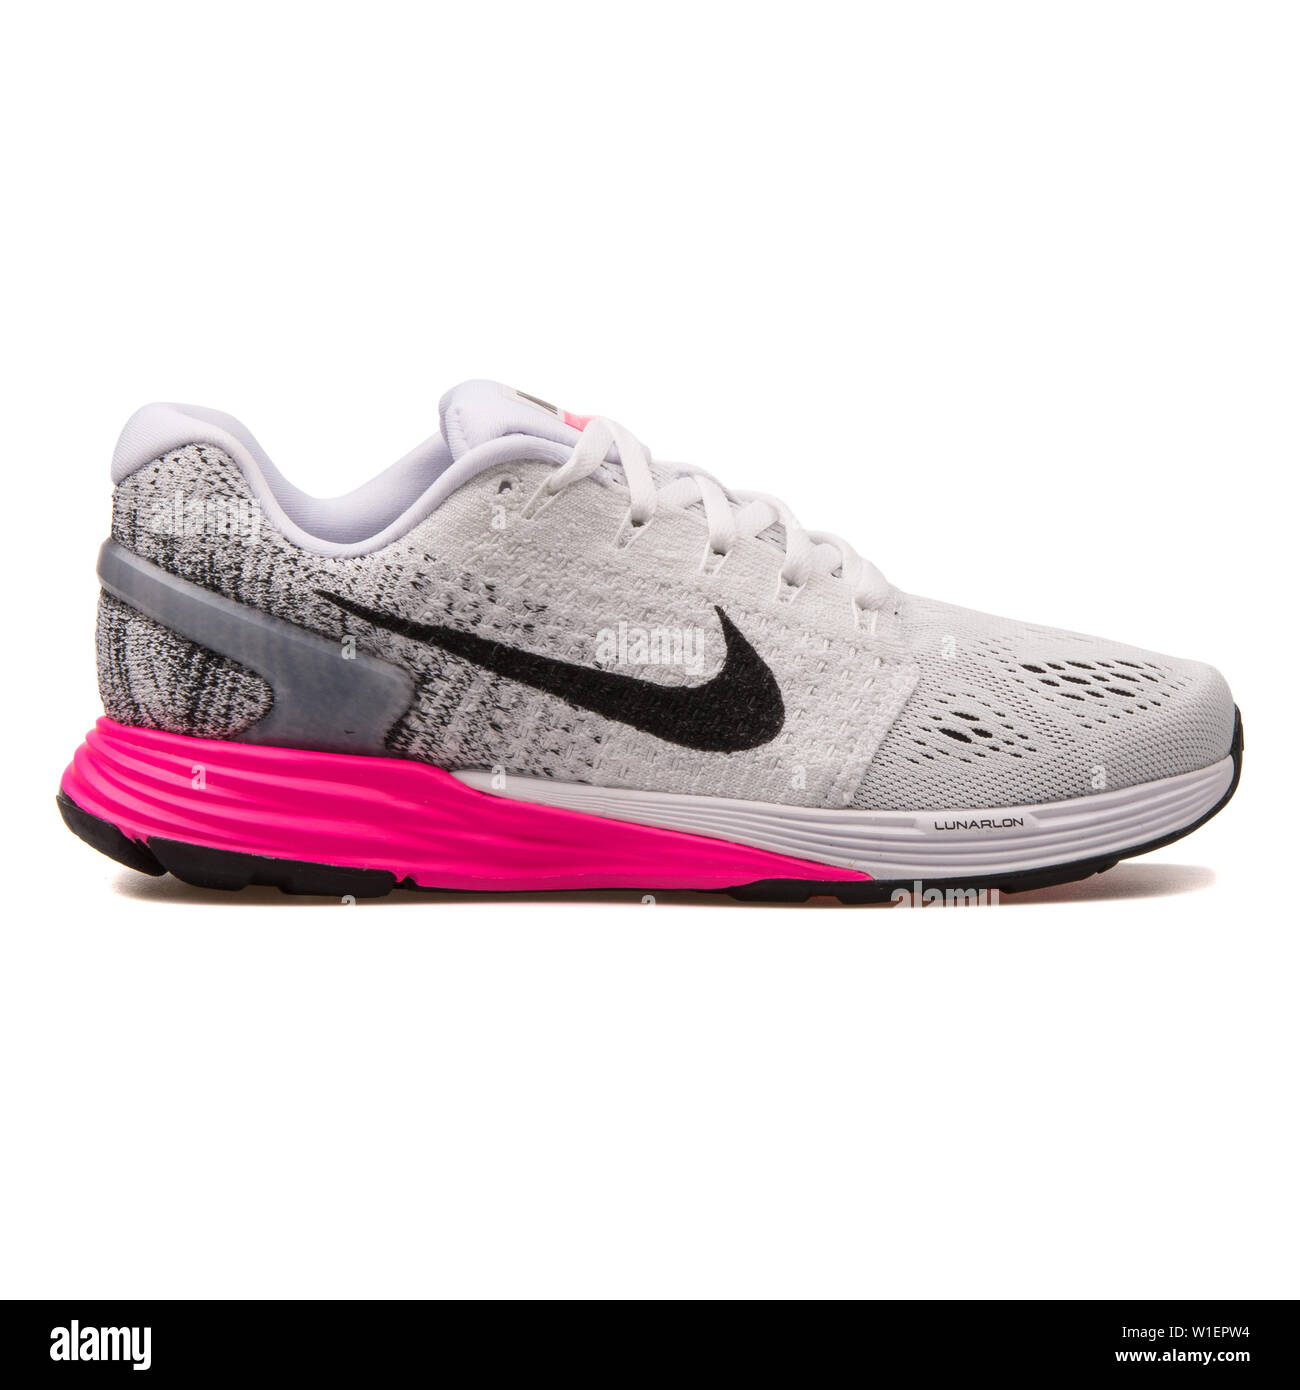 VIENNA, AUSTRIA - AUGUST 10, 2017: Nike Lunarglide 7 white and pink sneaker  on white background Stock Photo - Alamy